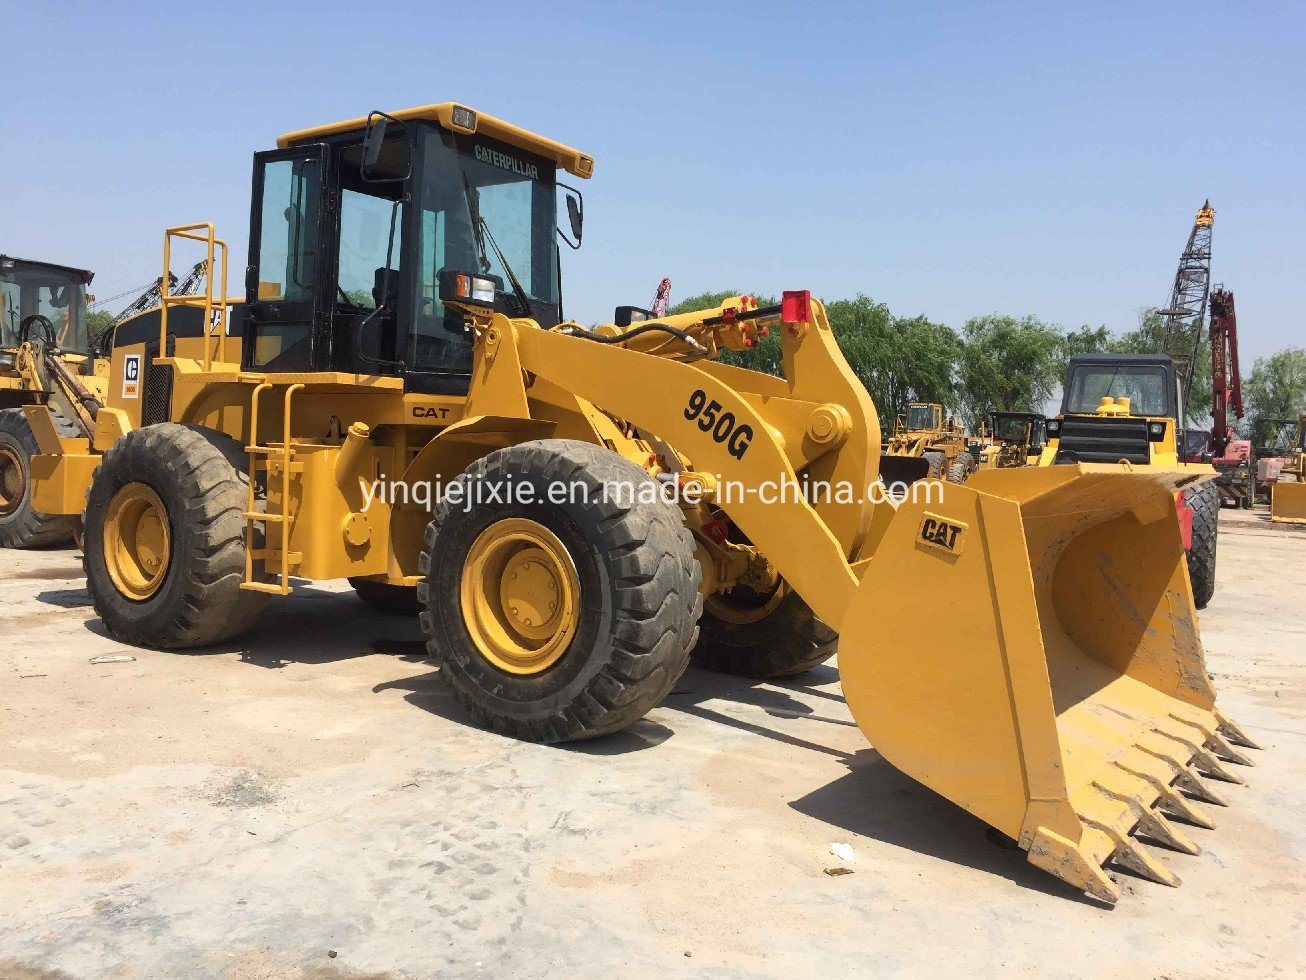 Used Caterpillar 950g Wheel Loader for Sale